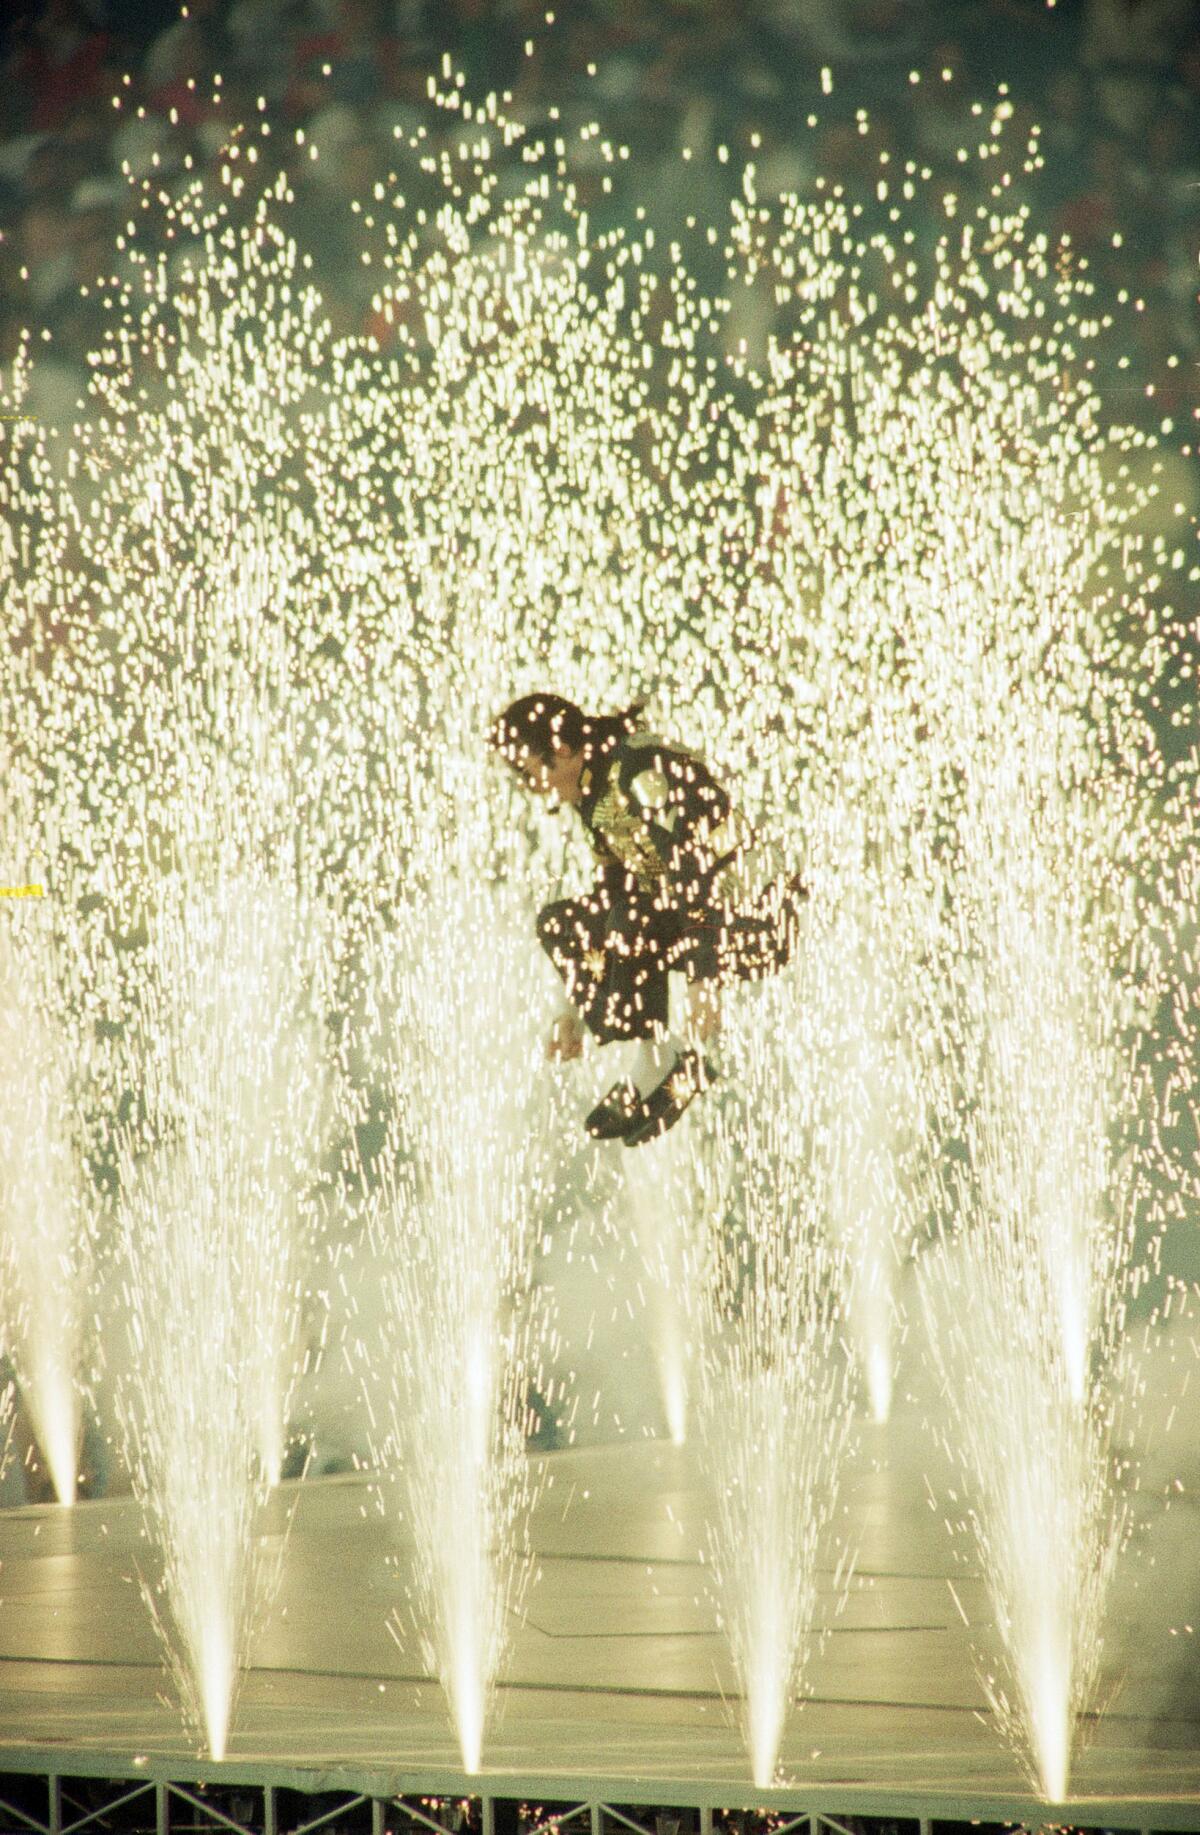 Michael Jackson leaps among the pyrotechnics during the halftime show at Super Bowl XXVII.